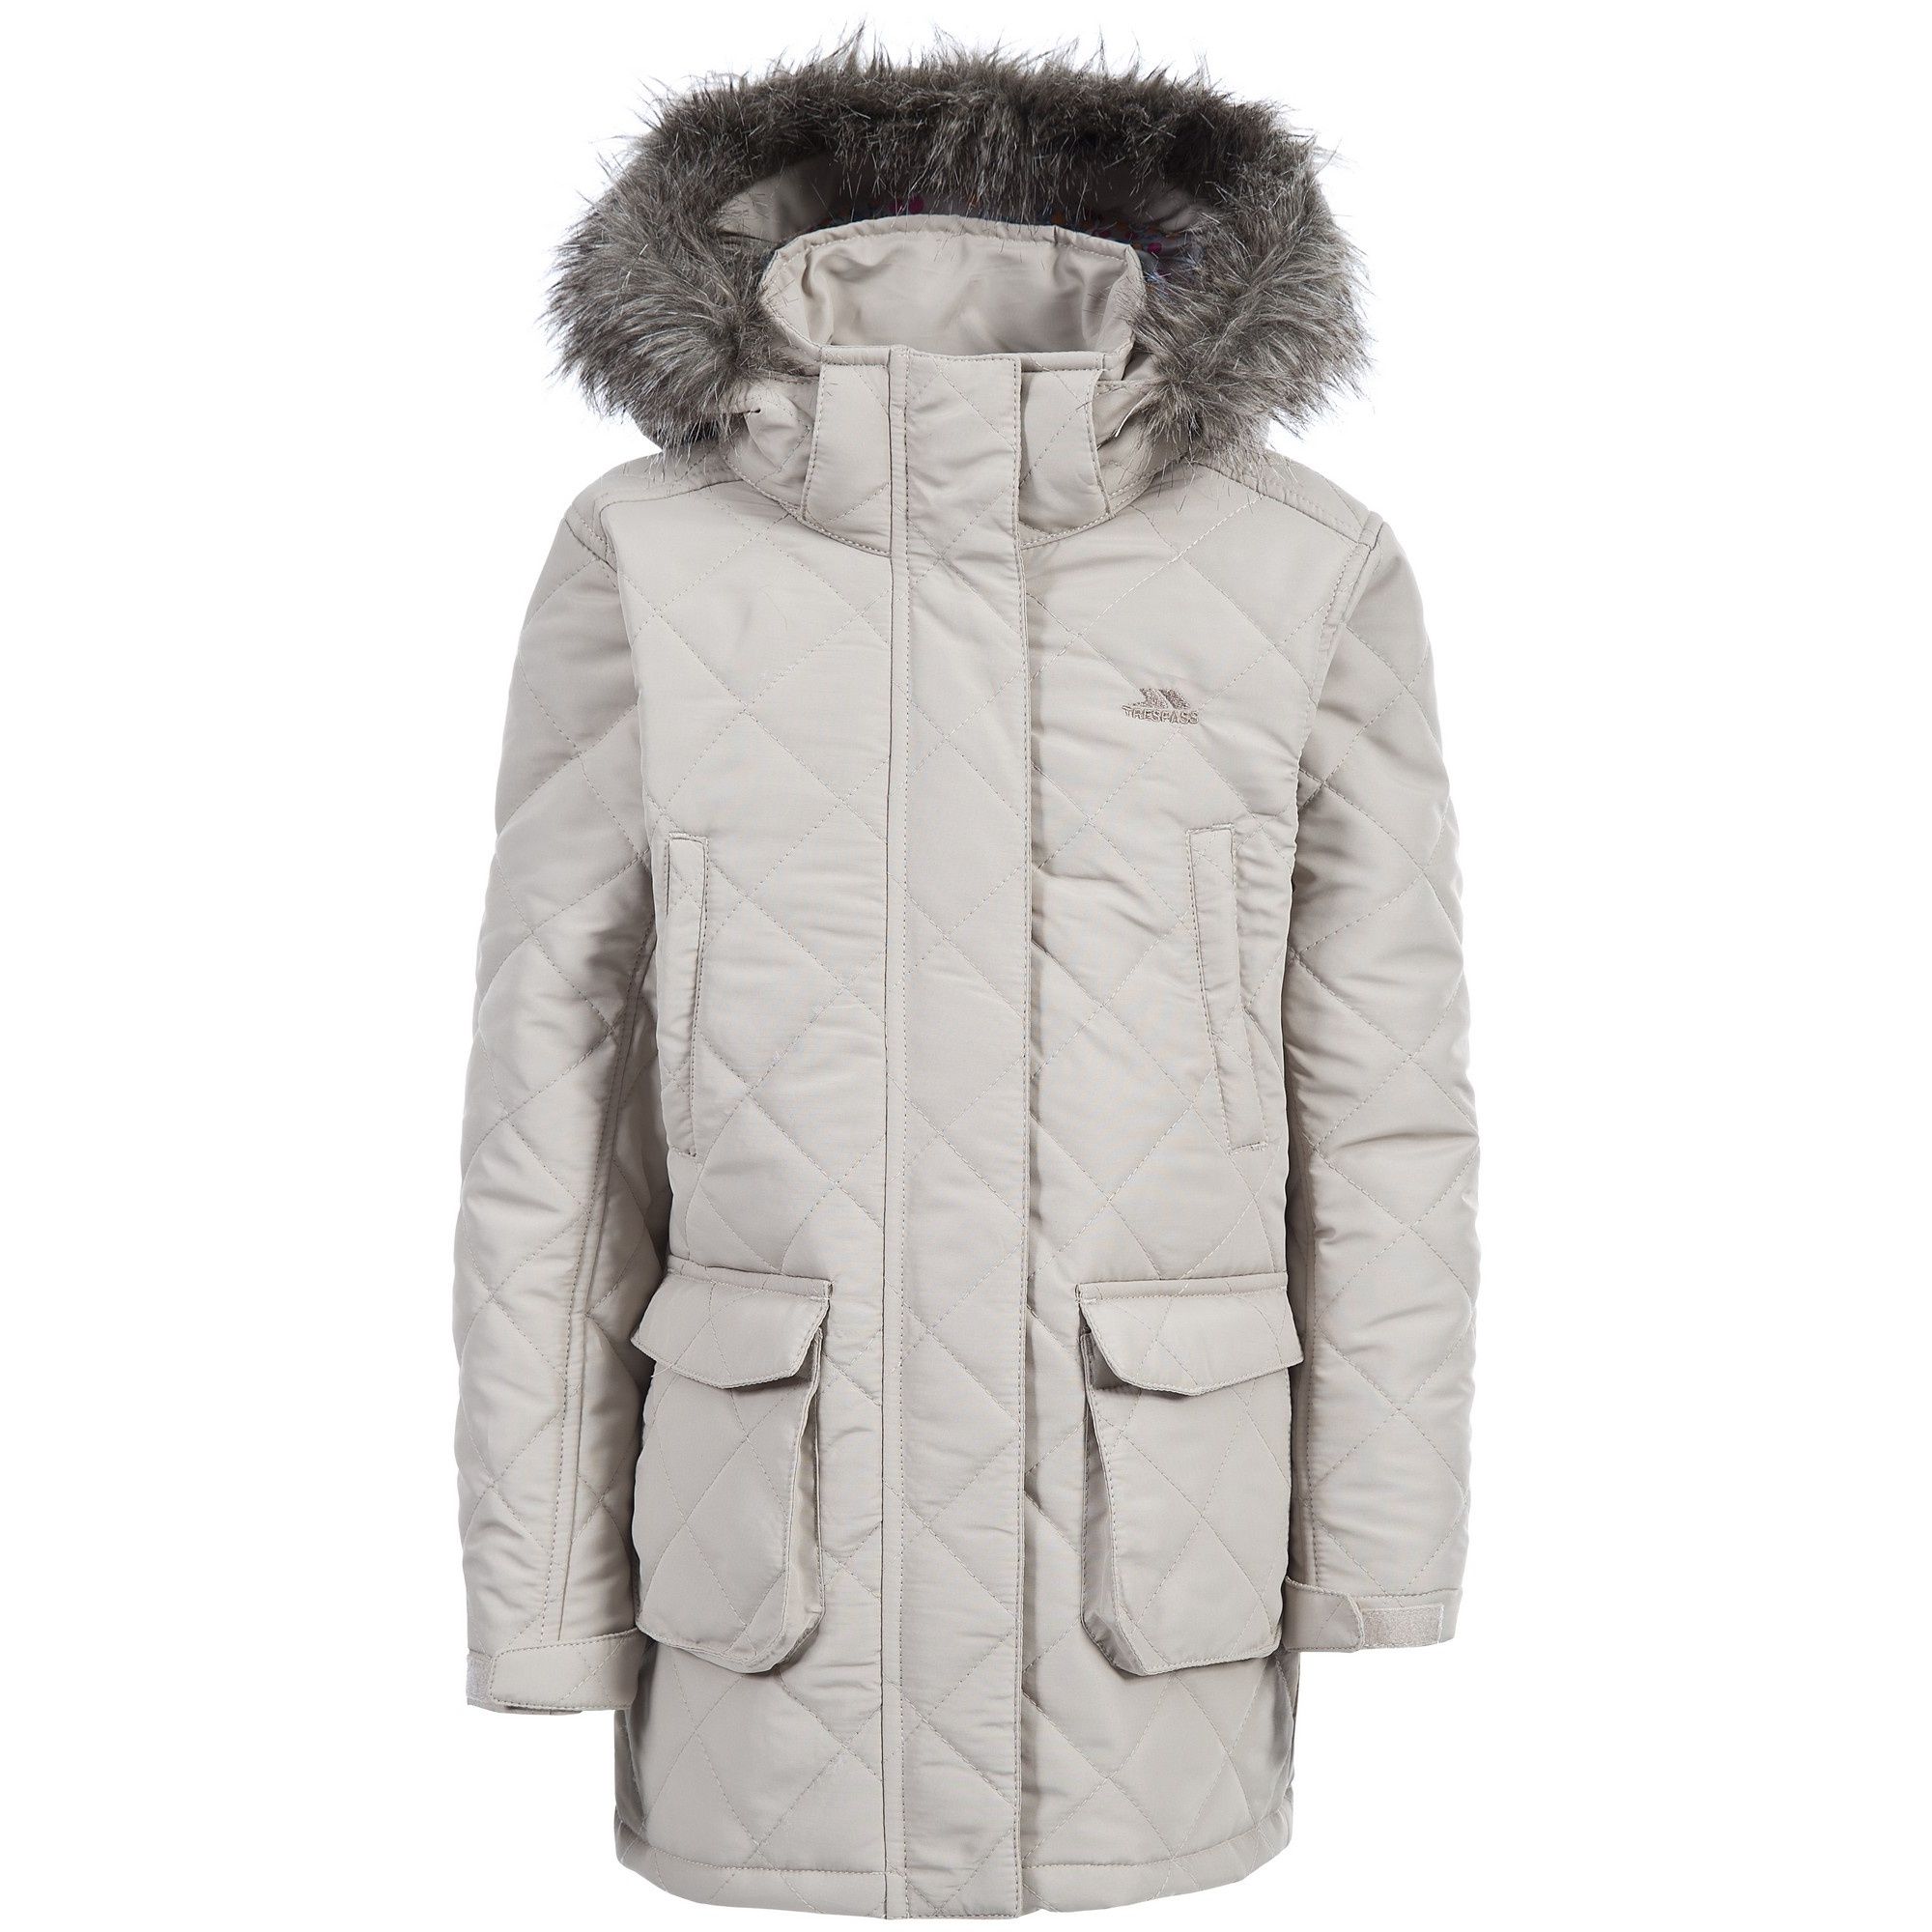 Quilted jacket. 2 hand warmer pockets. 2 lower patch pockets. Detachable hood with fur trim. Printed lining. Shell: 100% Polyester, Lining: 100% Polyester, Padding: 100% Polyester.